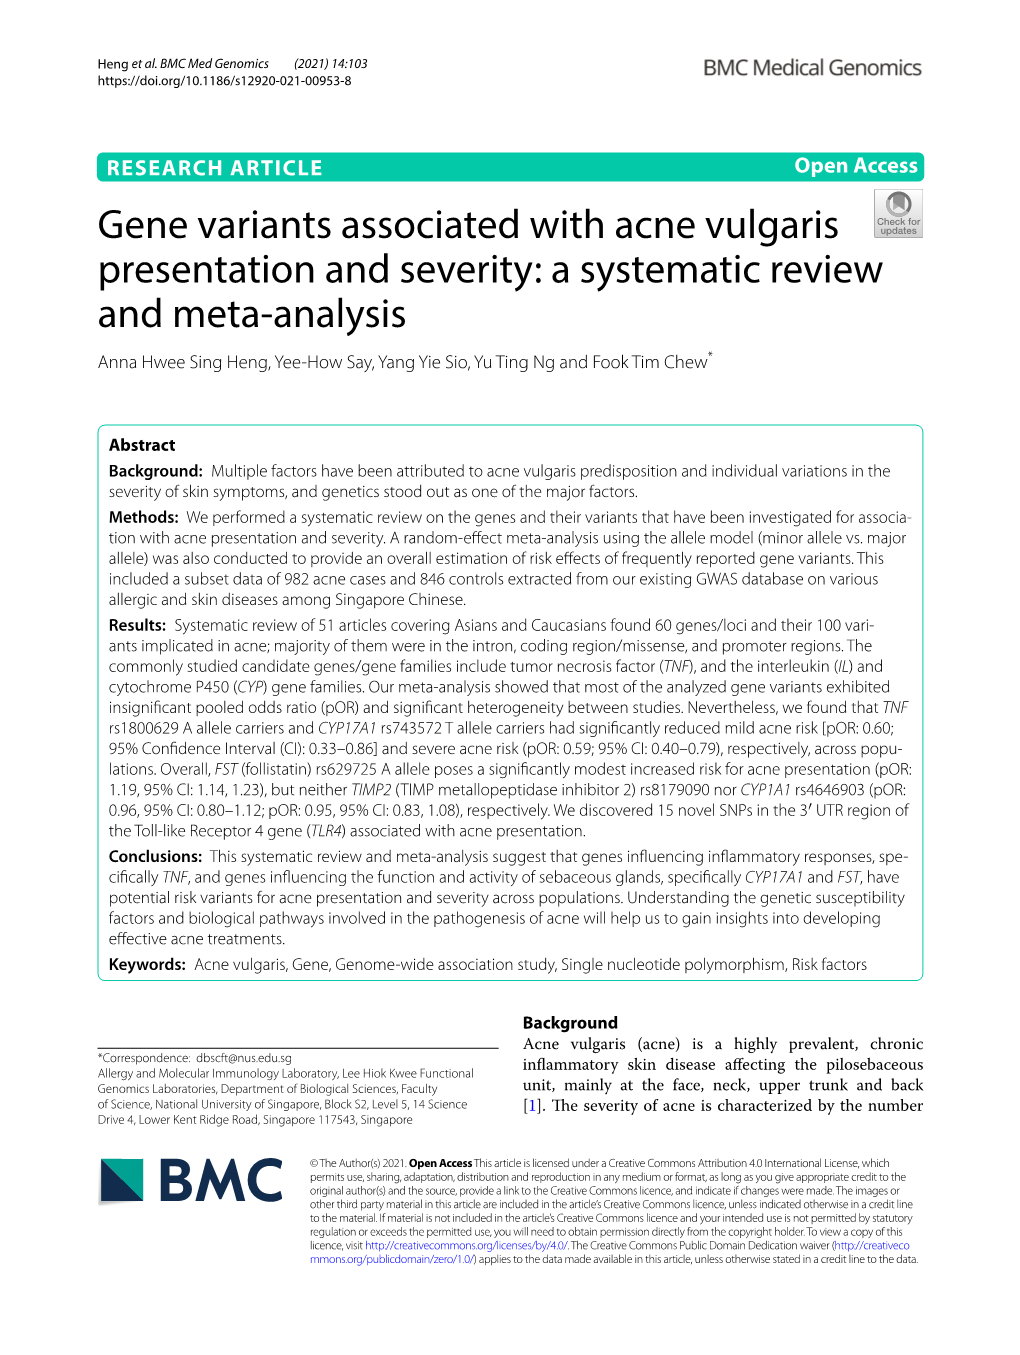 Gene Variants Associated with Acne Vulgaris Presentation and Severity